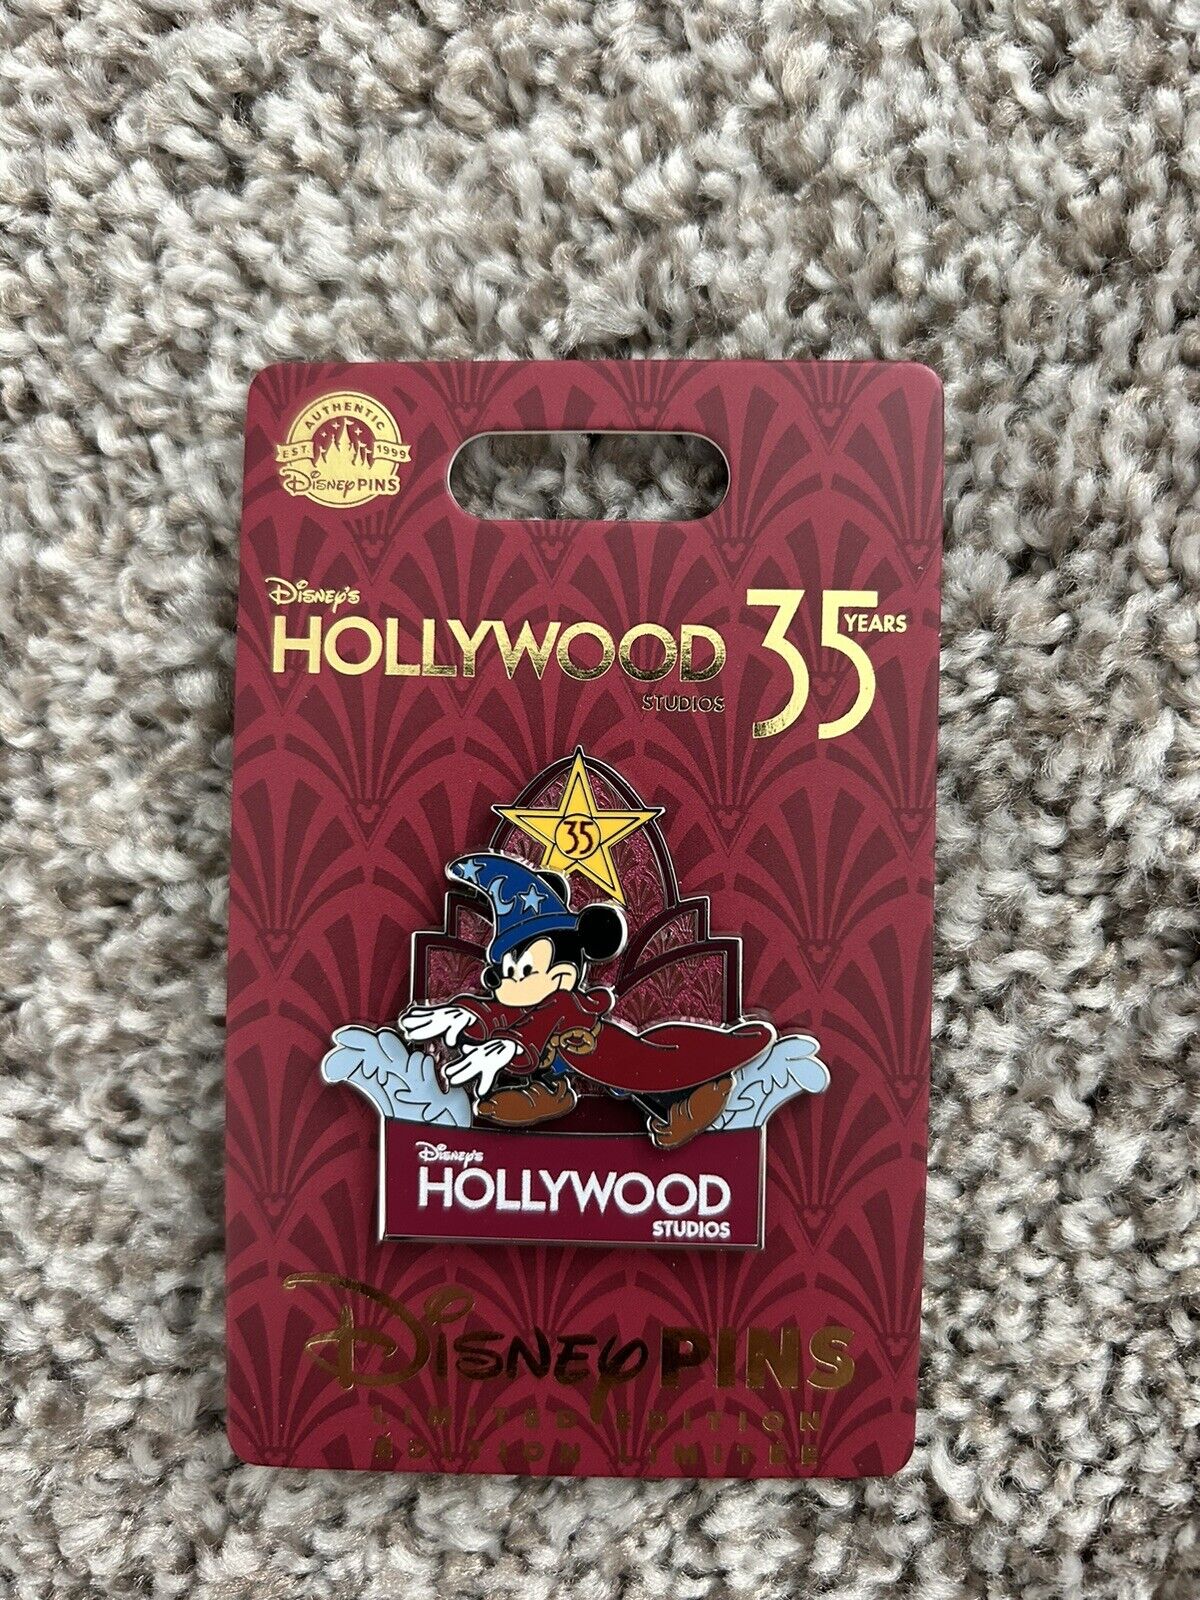 Disney Parks Hollywood Studios 35th Anniversary Sorcerer Mickey LE Pin New